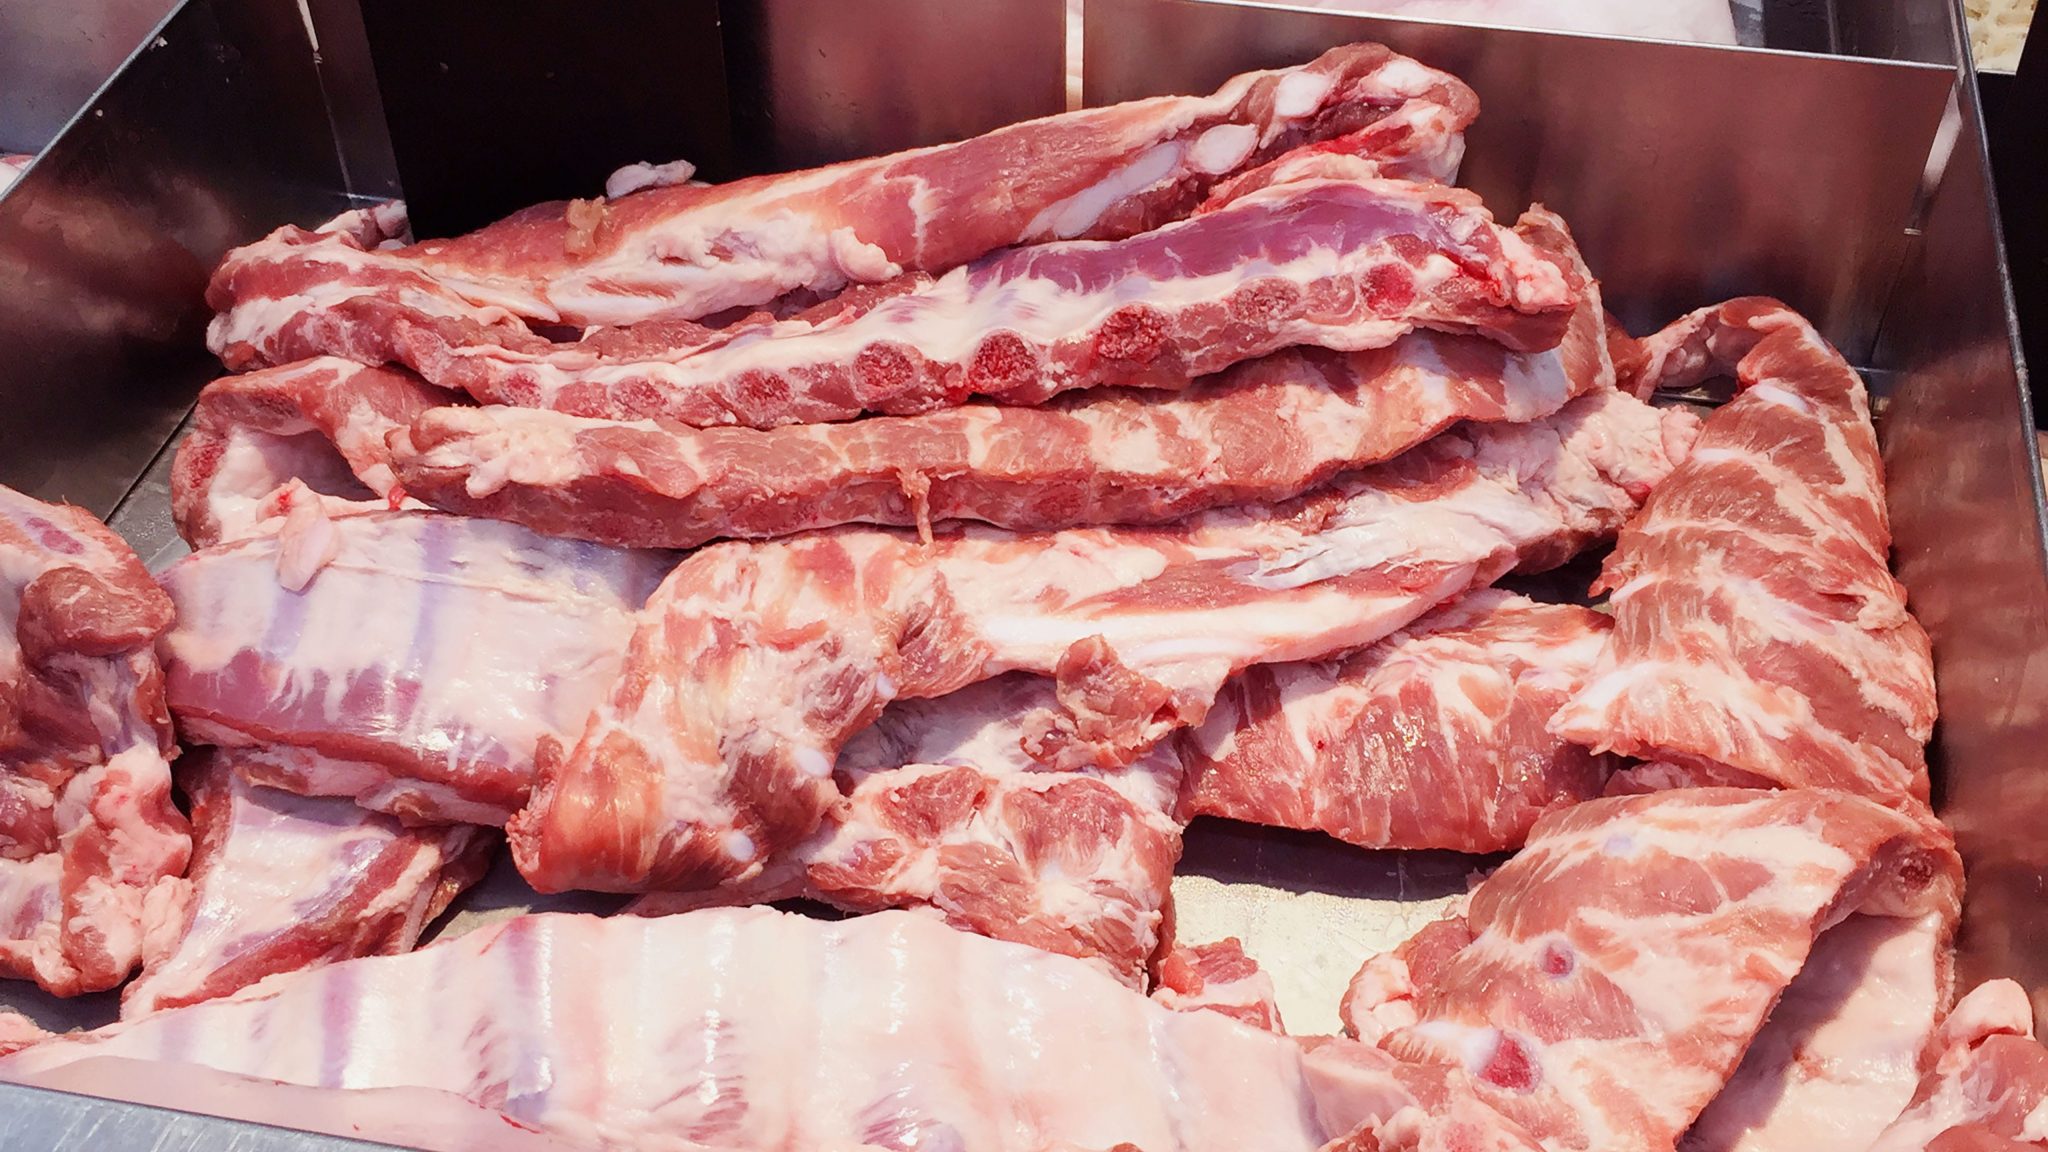 More shipments of hogs, frozen pork from Vis-Min to ease supply, prices in Luzon